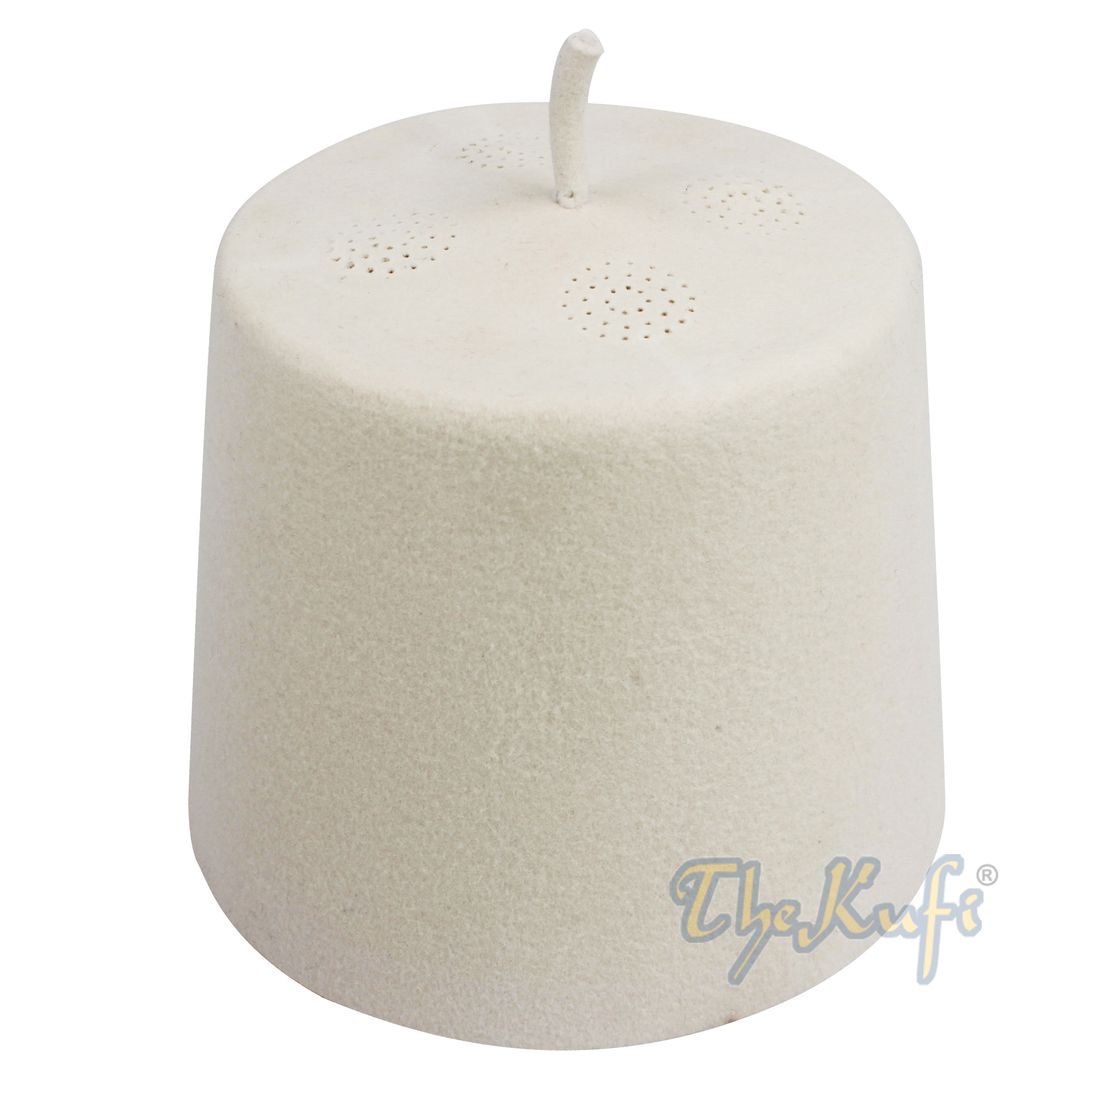 Tall White Fez Tradition Felt Perforated Tarboosh with Stem